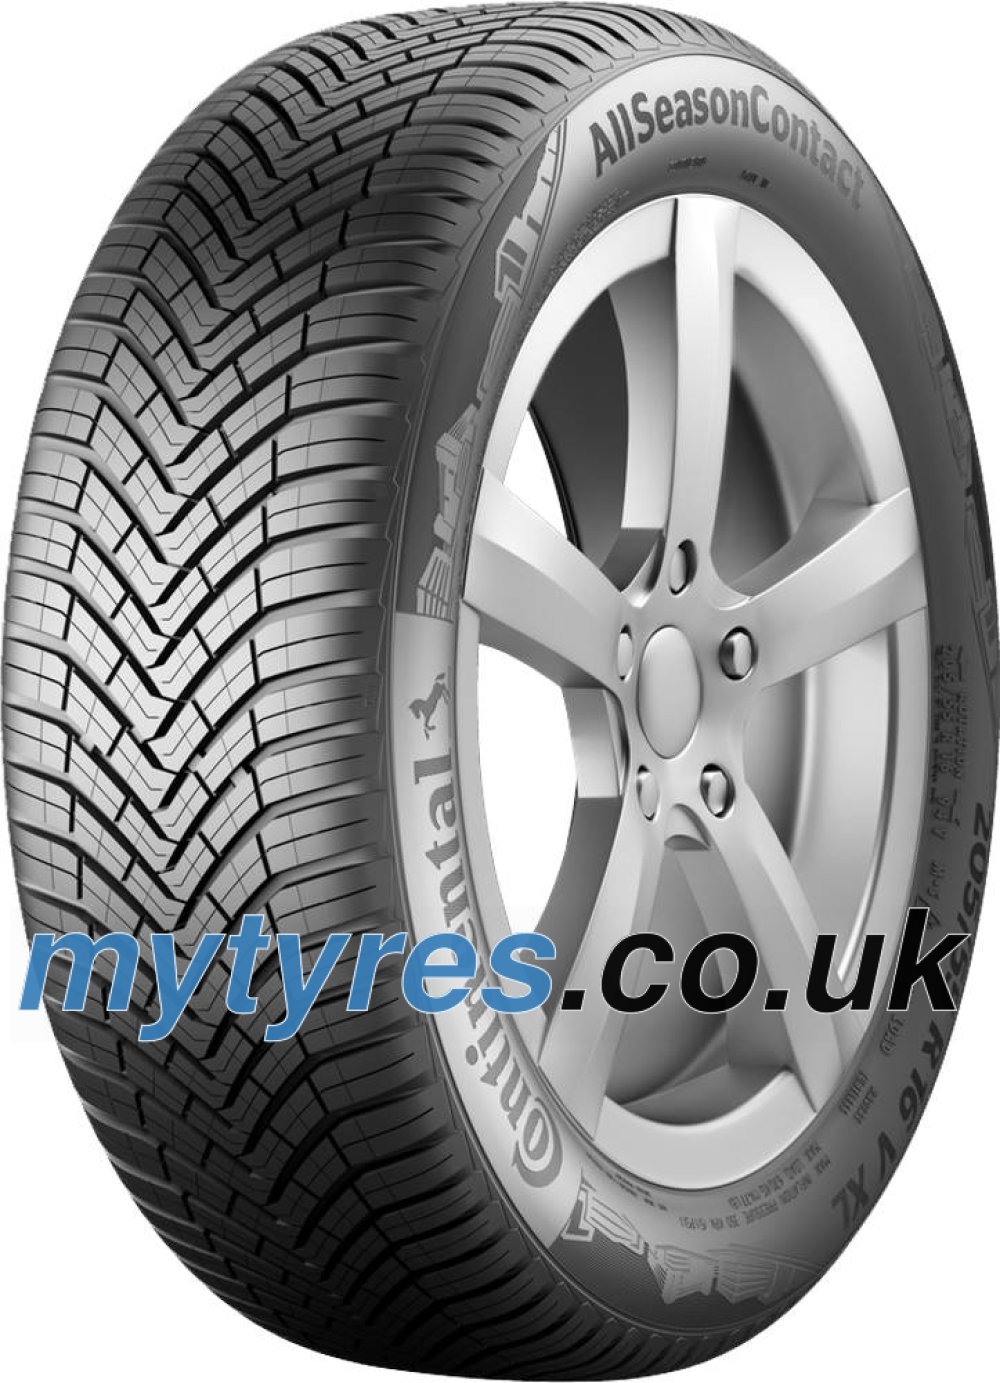 product image of Continental AllSeasonContact ( 225/55 R16 99V XL )